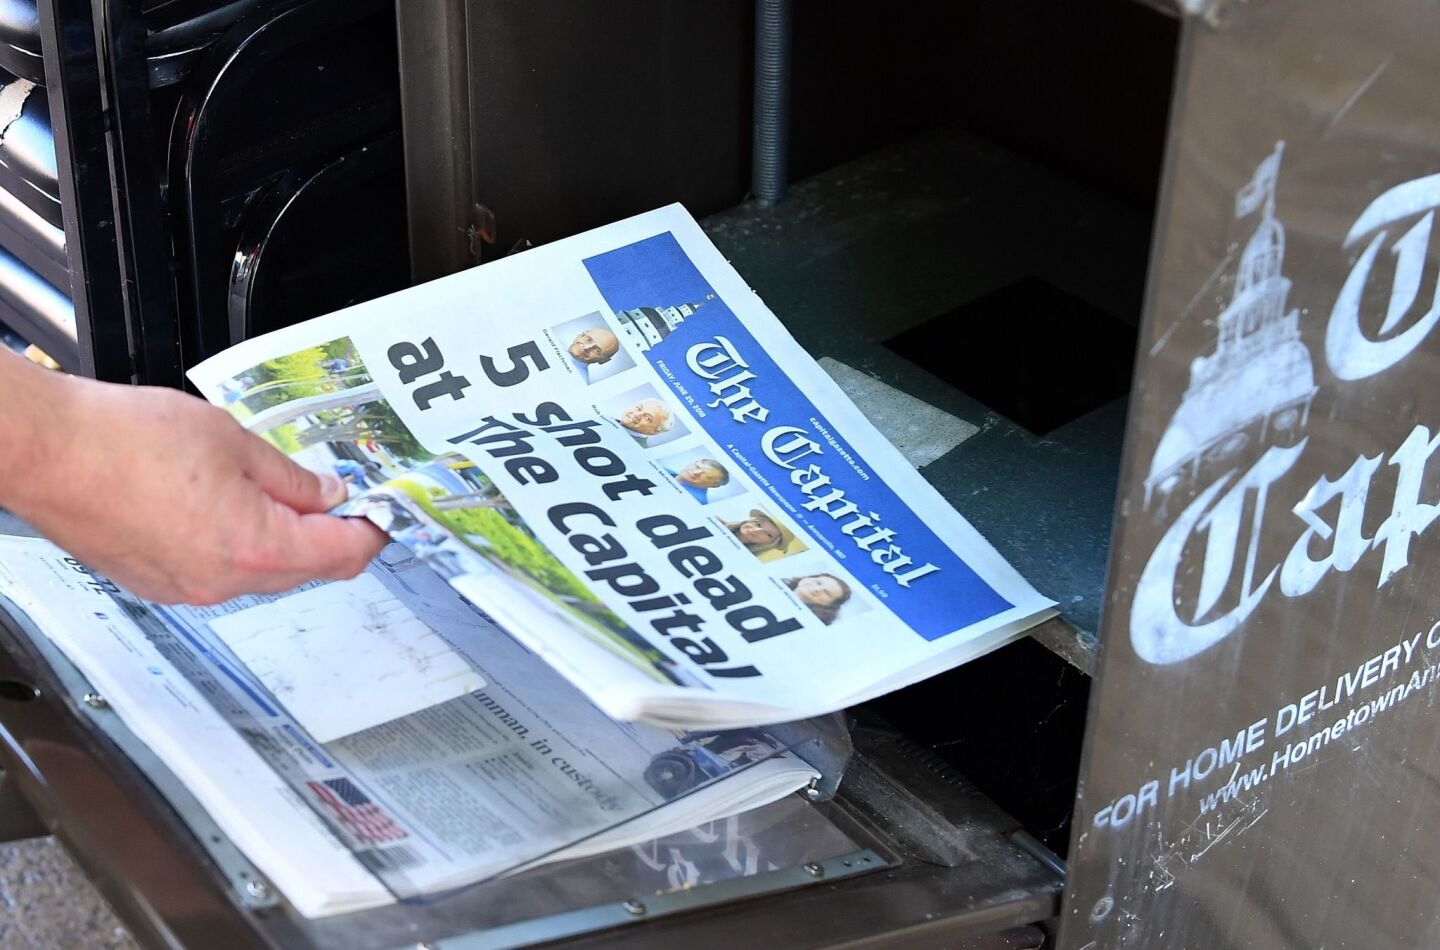 A resident buys a copy of the Capital newspaper in Annapolis, Md., a day after five journalists were shot dead in the newsroom.